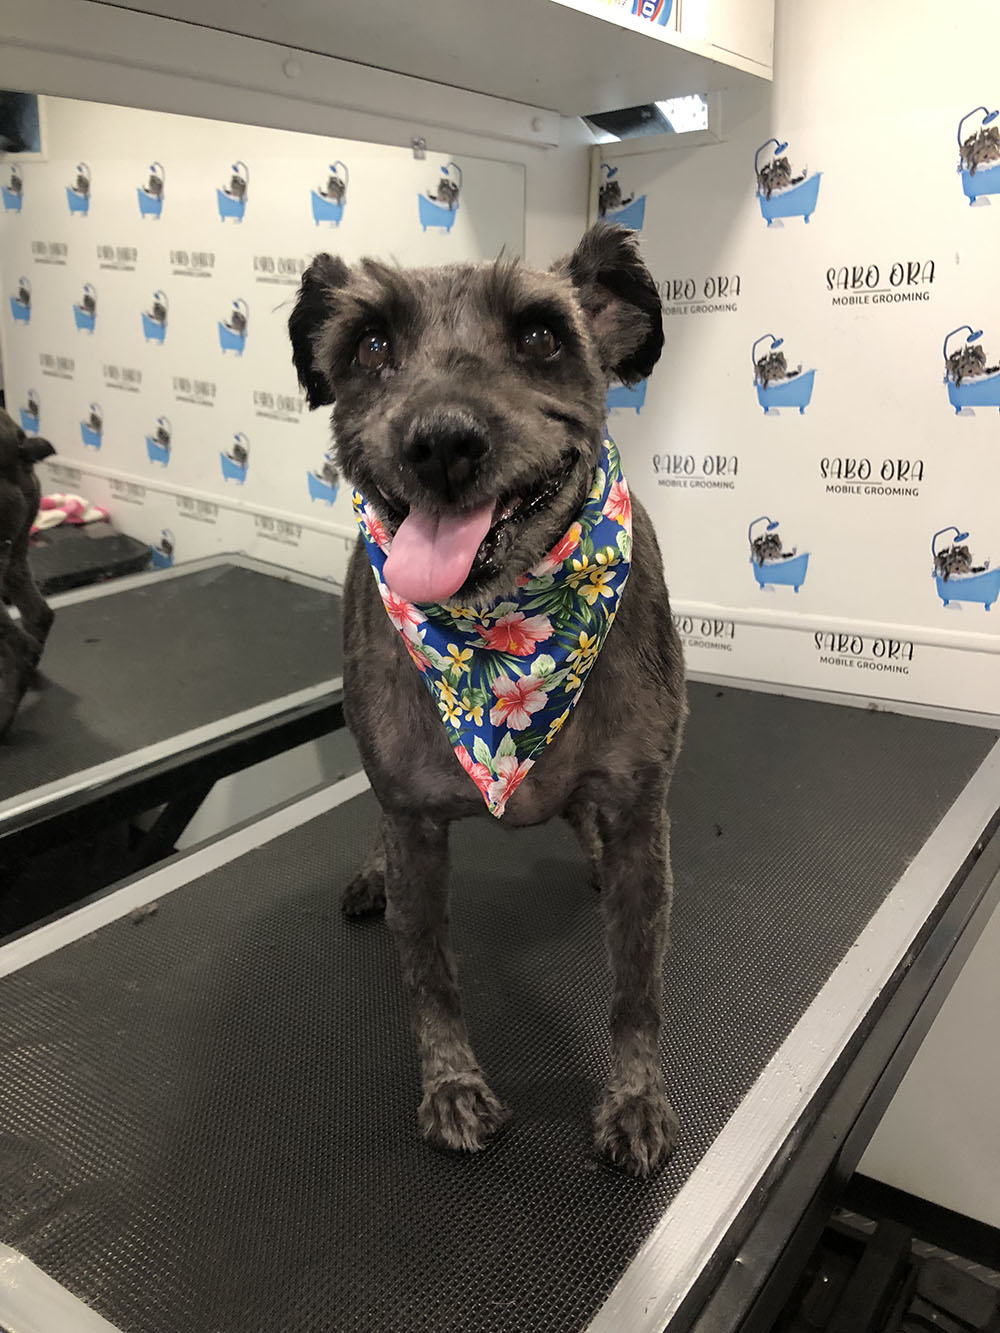 A Dog After Being Fully Groomed With a Collar